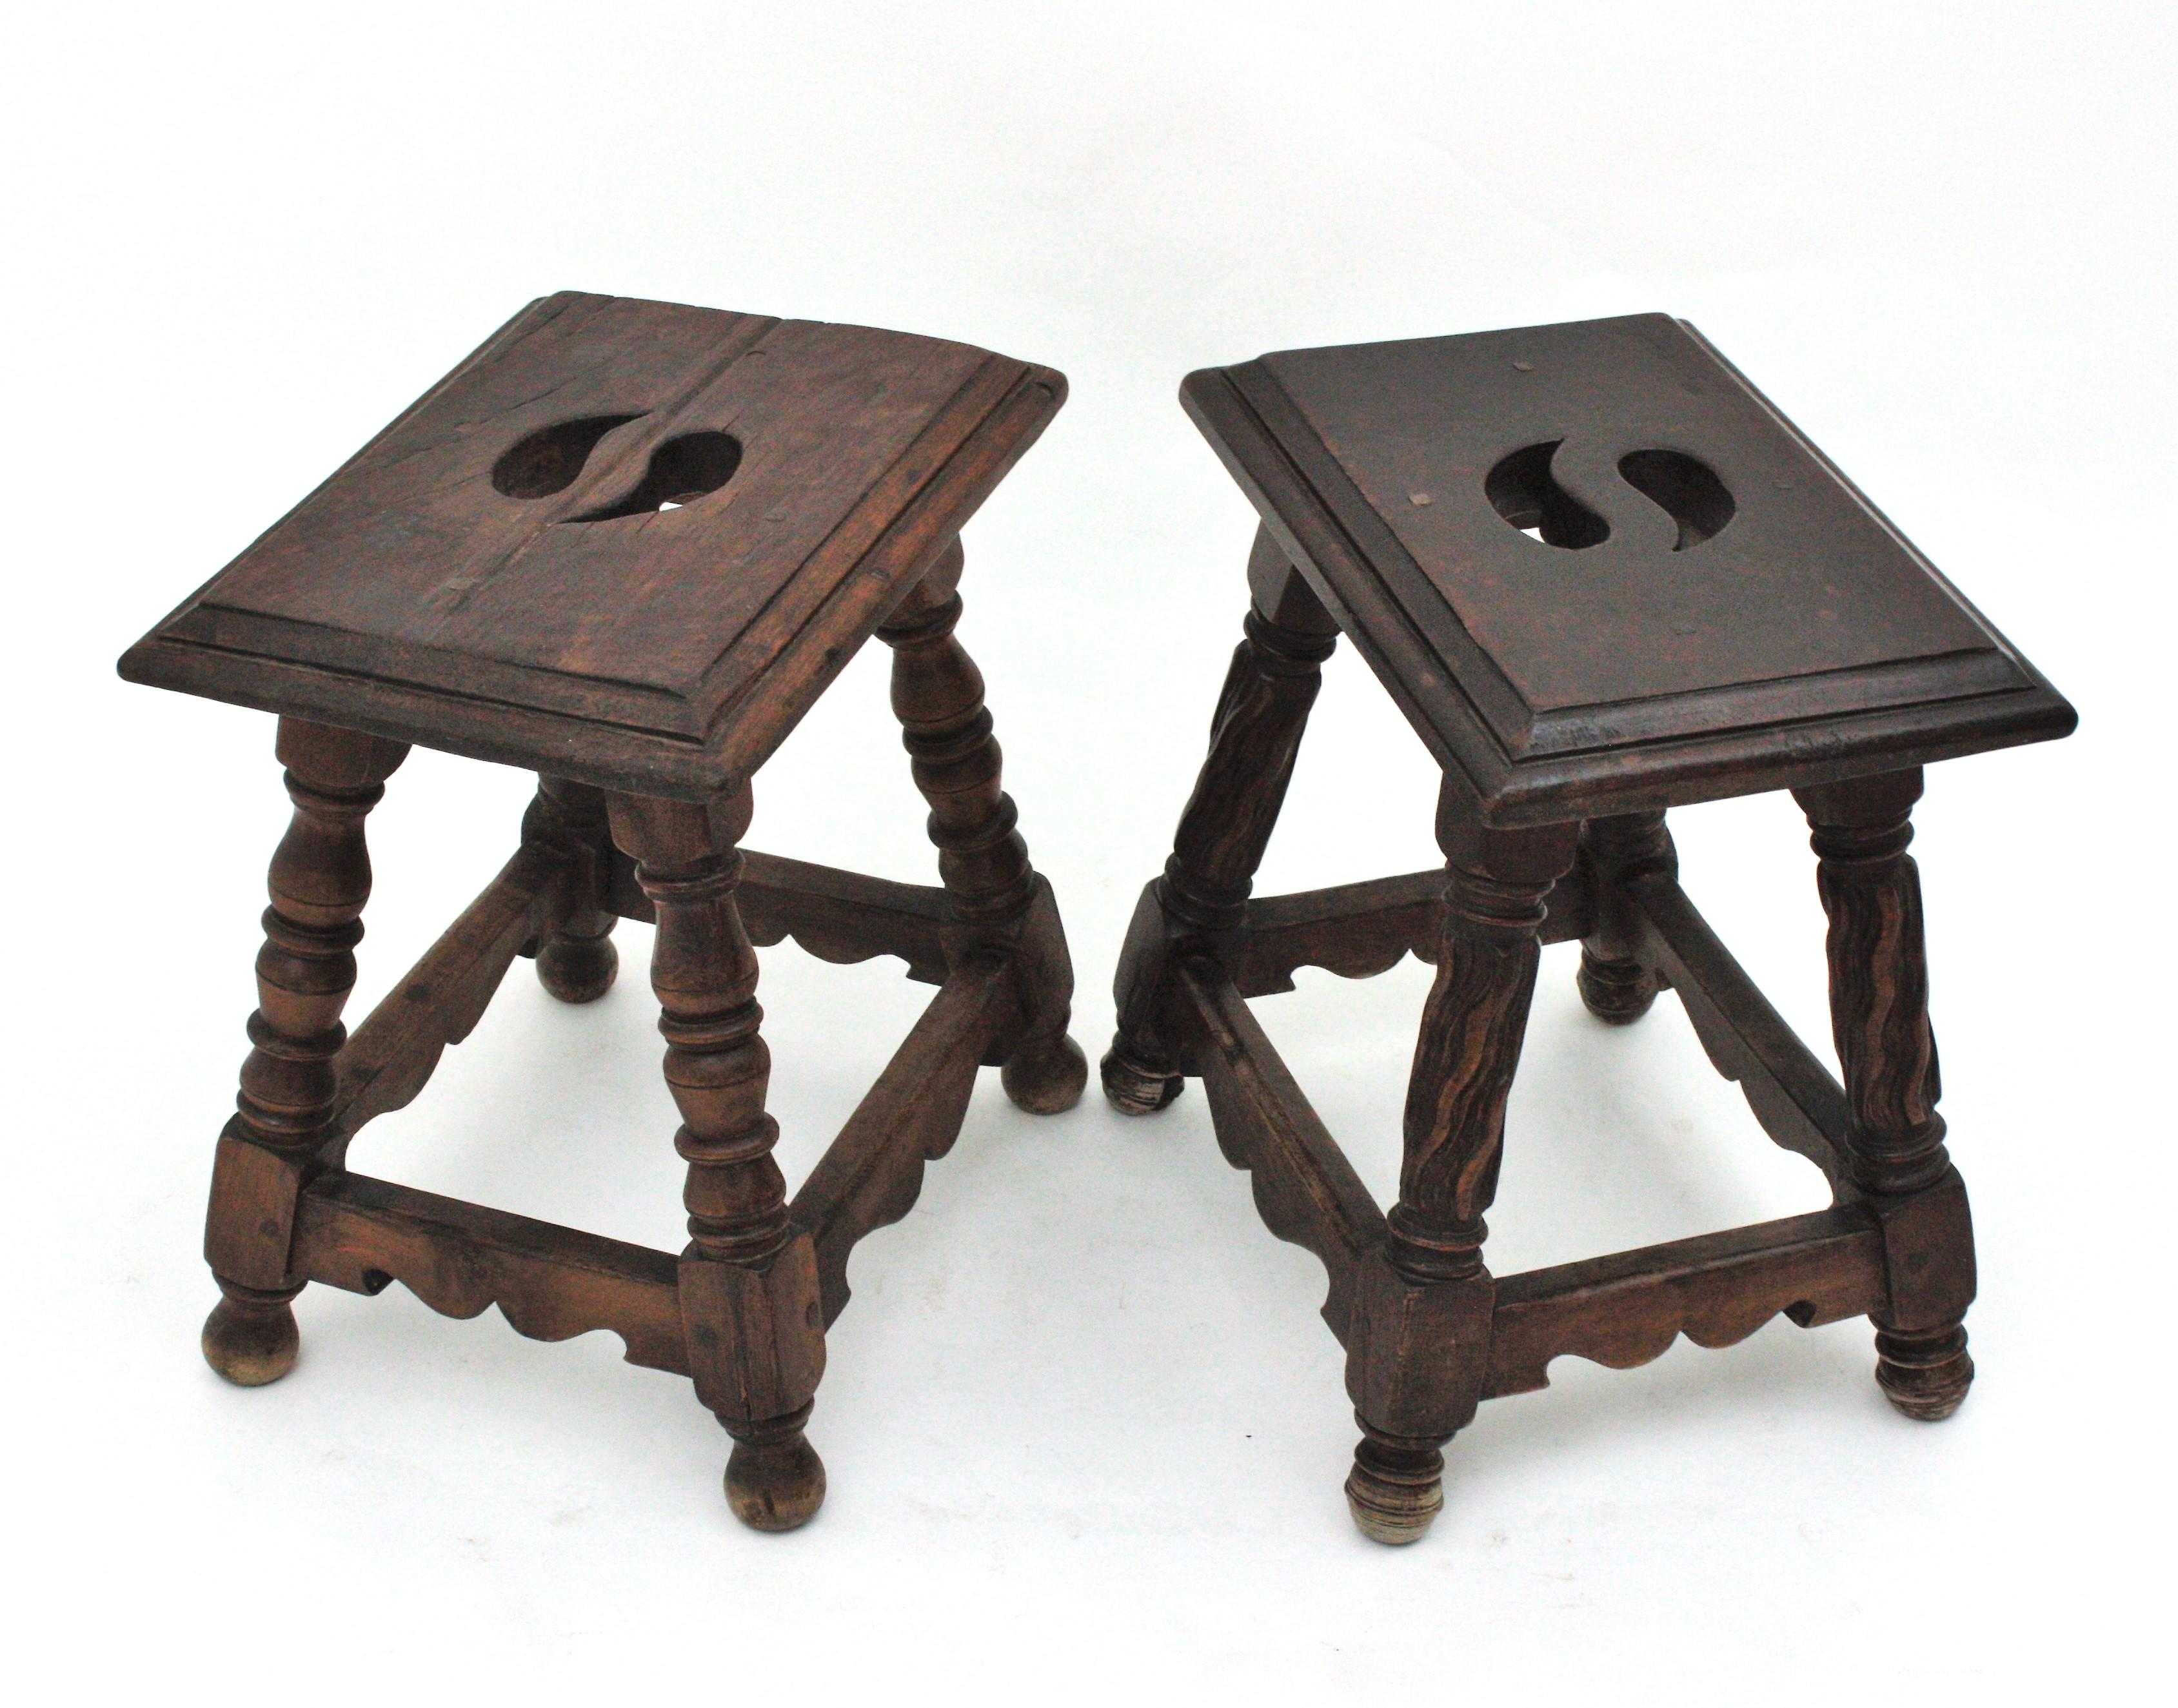 Pair of Spanish Colonial Side Tables / Stools in Carved Wood, 1940s For Sale 2